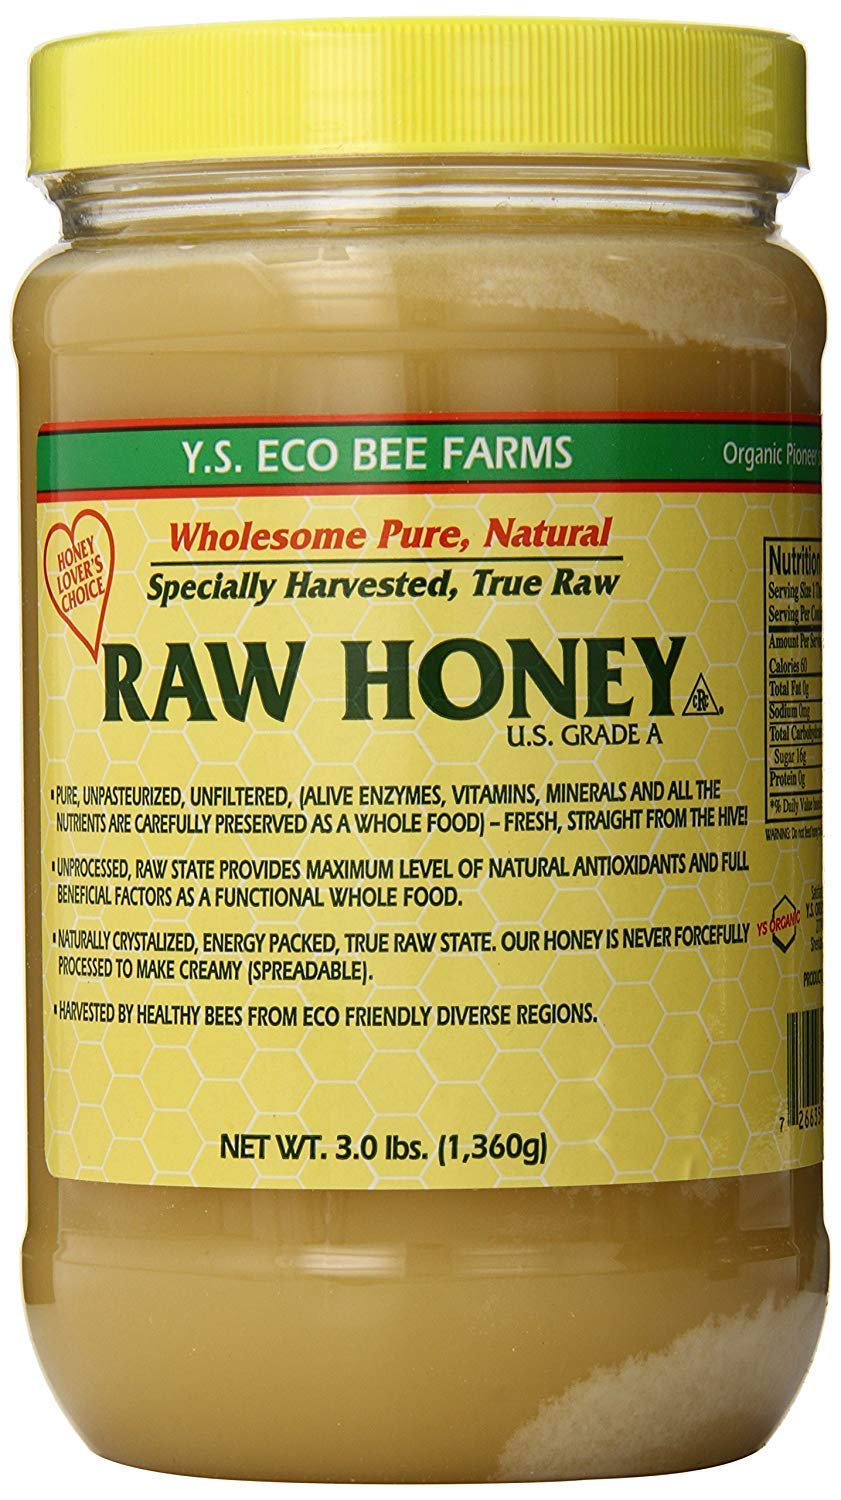 YS Eco Bee Farms RAW HONEY - Raw, Unfiltered, Unpasteurized - Kosher 3lbs - PACK OF 4